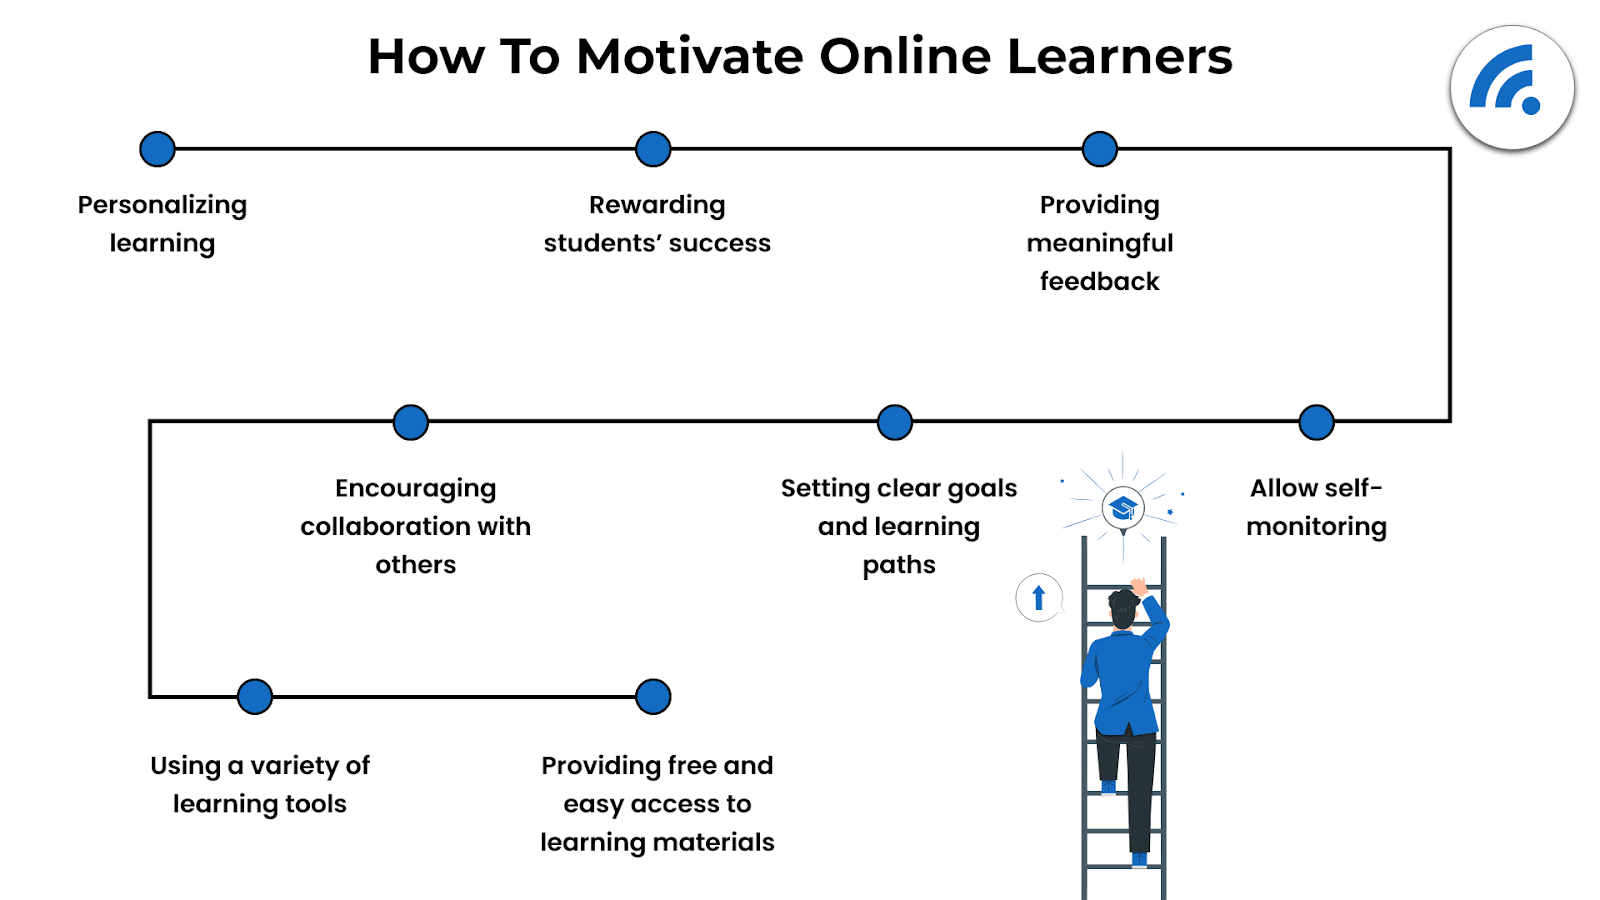 How to motivate online learners